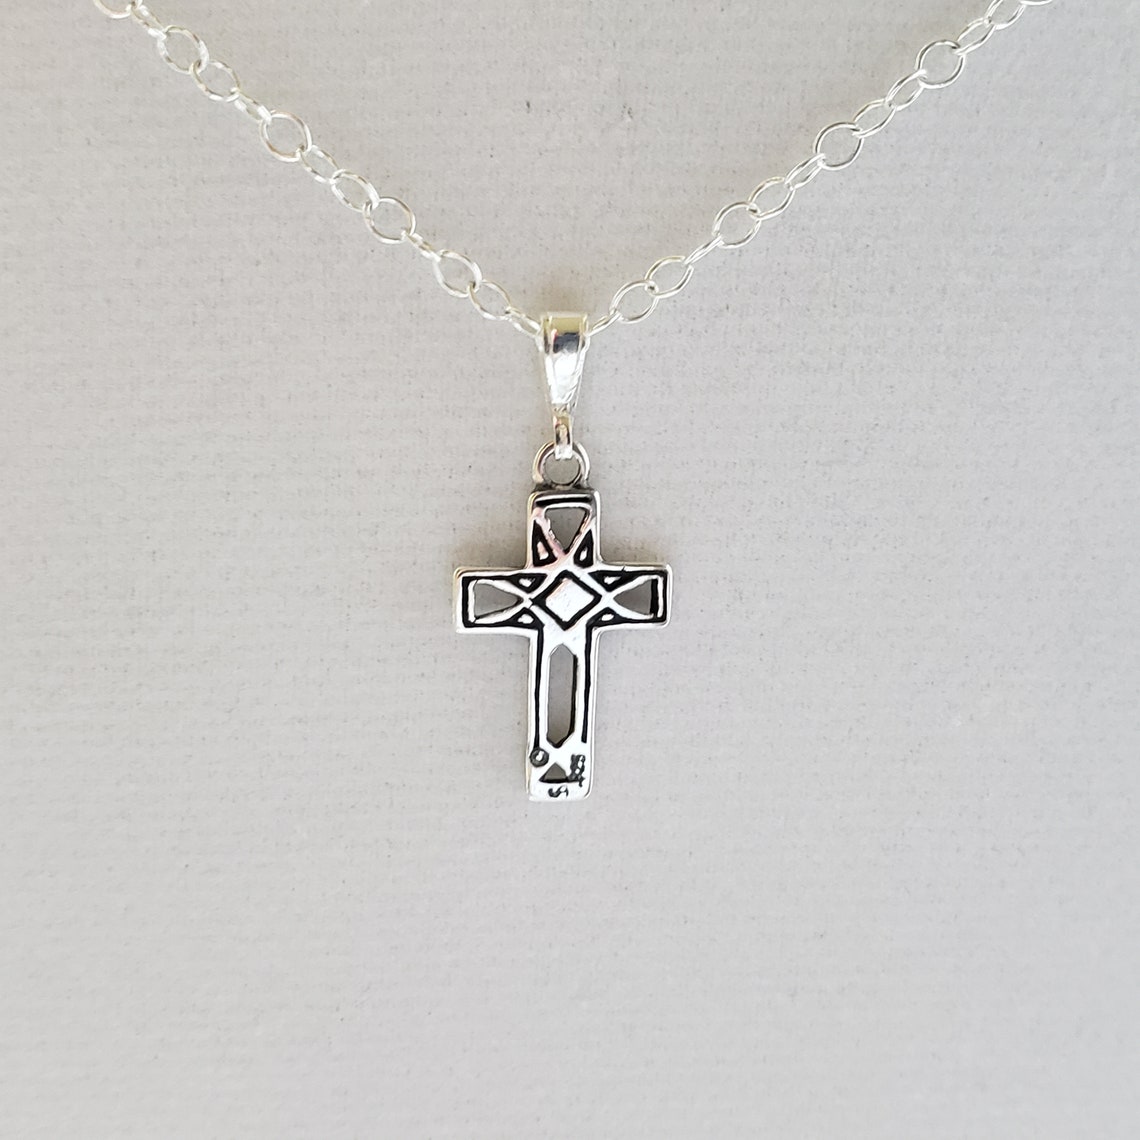 Antique Floral Cross Pendant or Necklace in 925 Sterling | Etsy